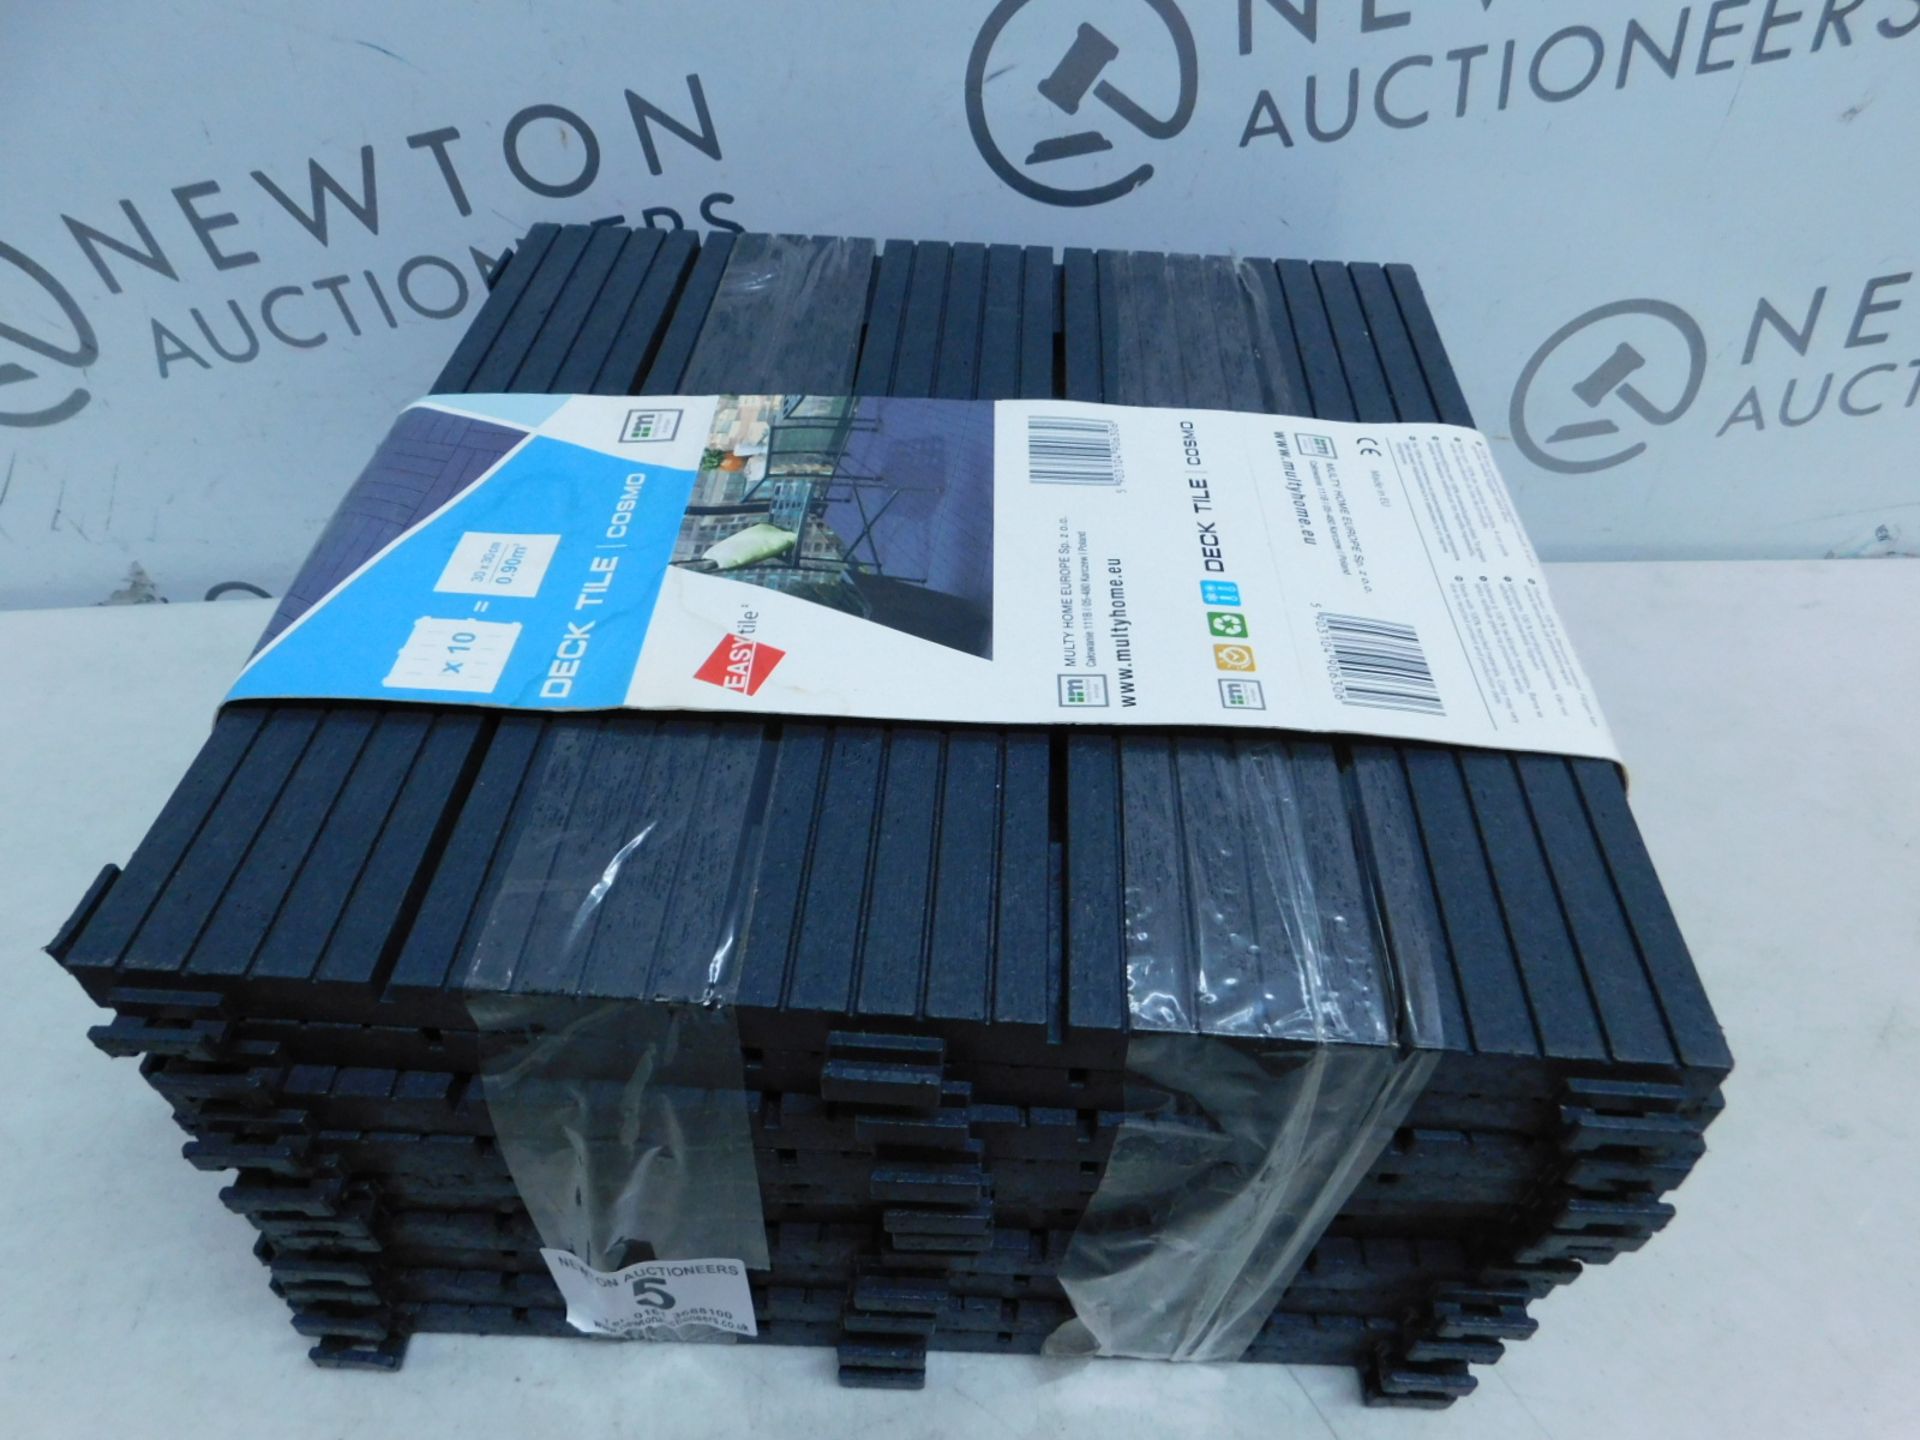 1 MULTY HOME DECK TILES (10 PACK) WITH QUICK CLICK SYSTEM RP Â£29